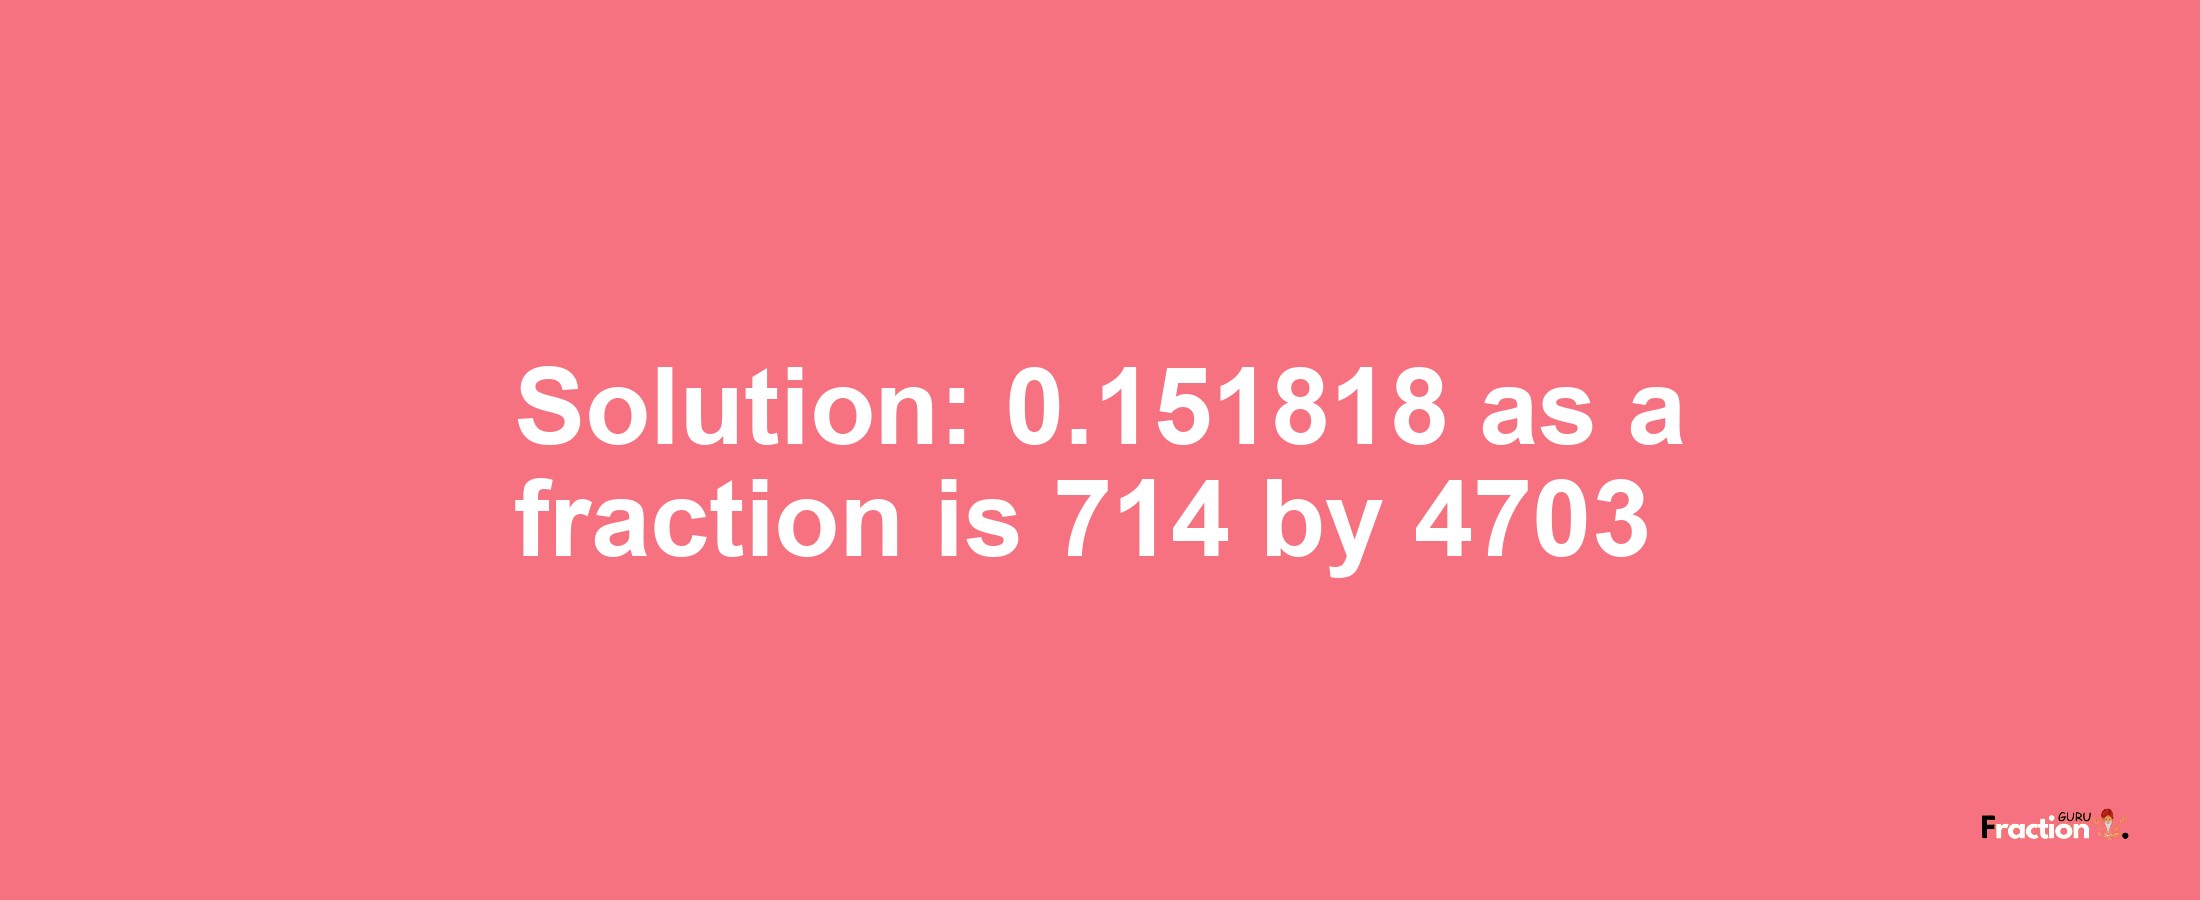 Solution:0.151818 as a fraction is 714/4703